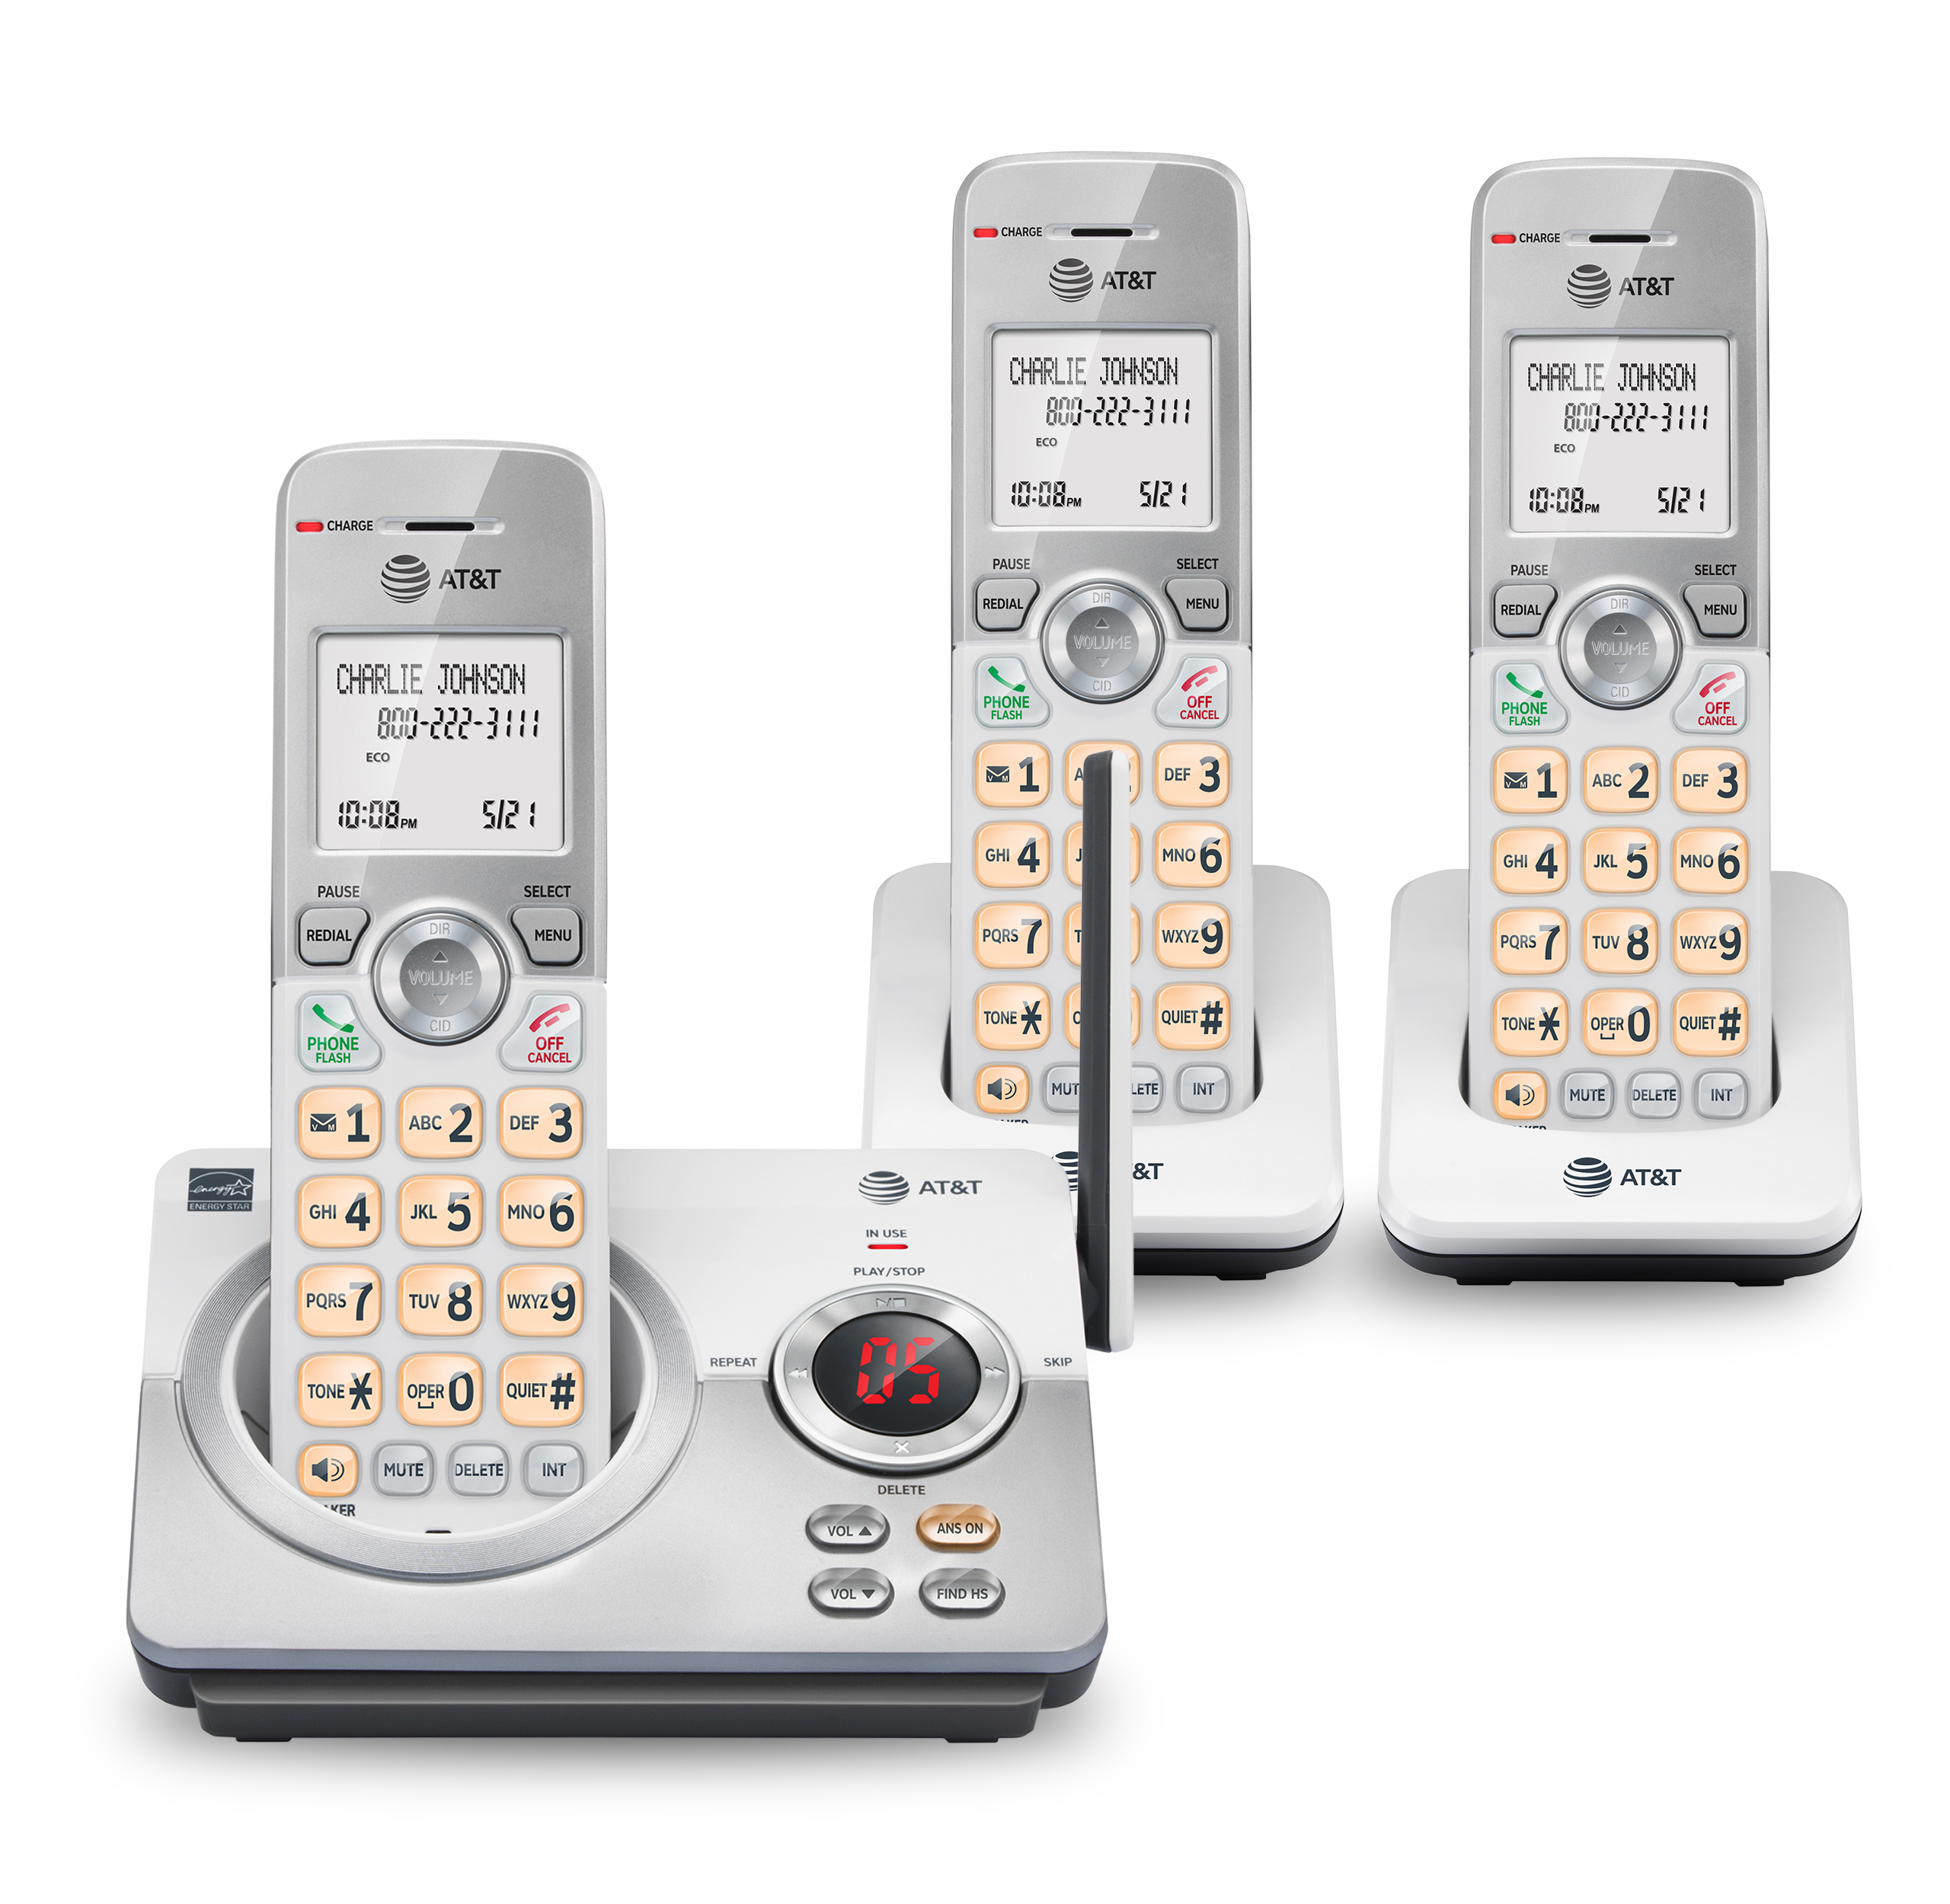 AT&T EL52319 Expandable Cordless Phone with Unsurpassed Range, Answering System and Caller ID, 3 Handsets, White/Silver - image 1 of 10